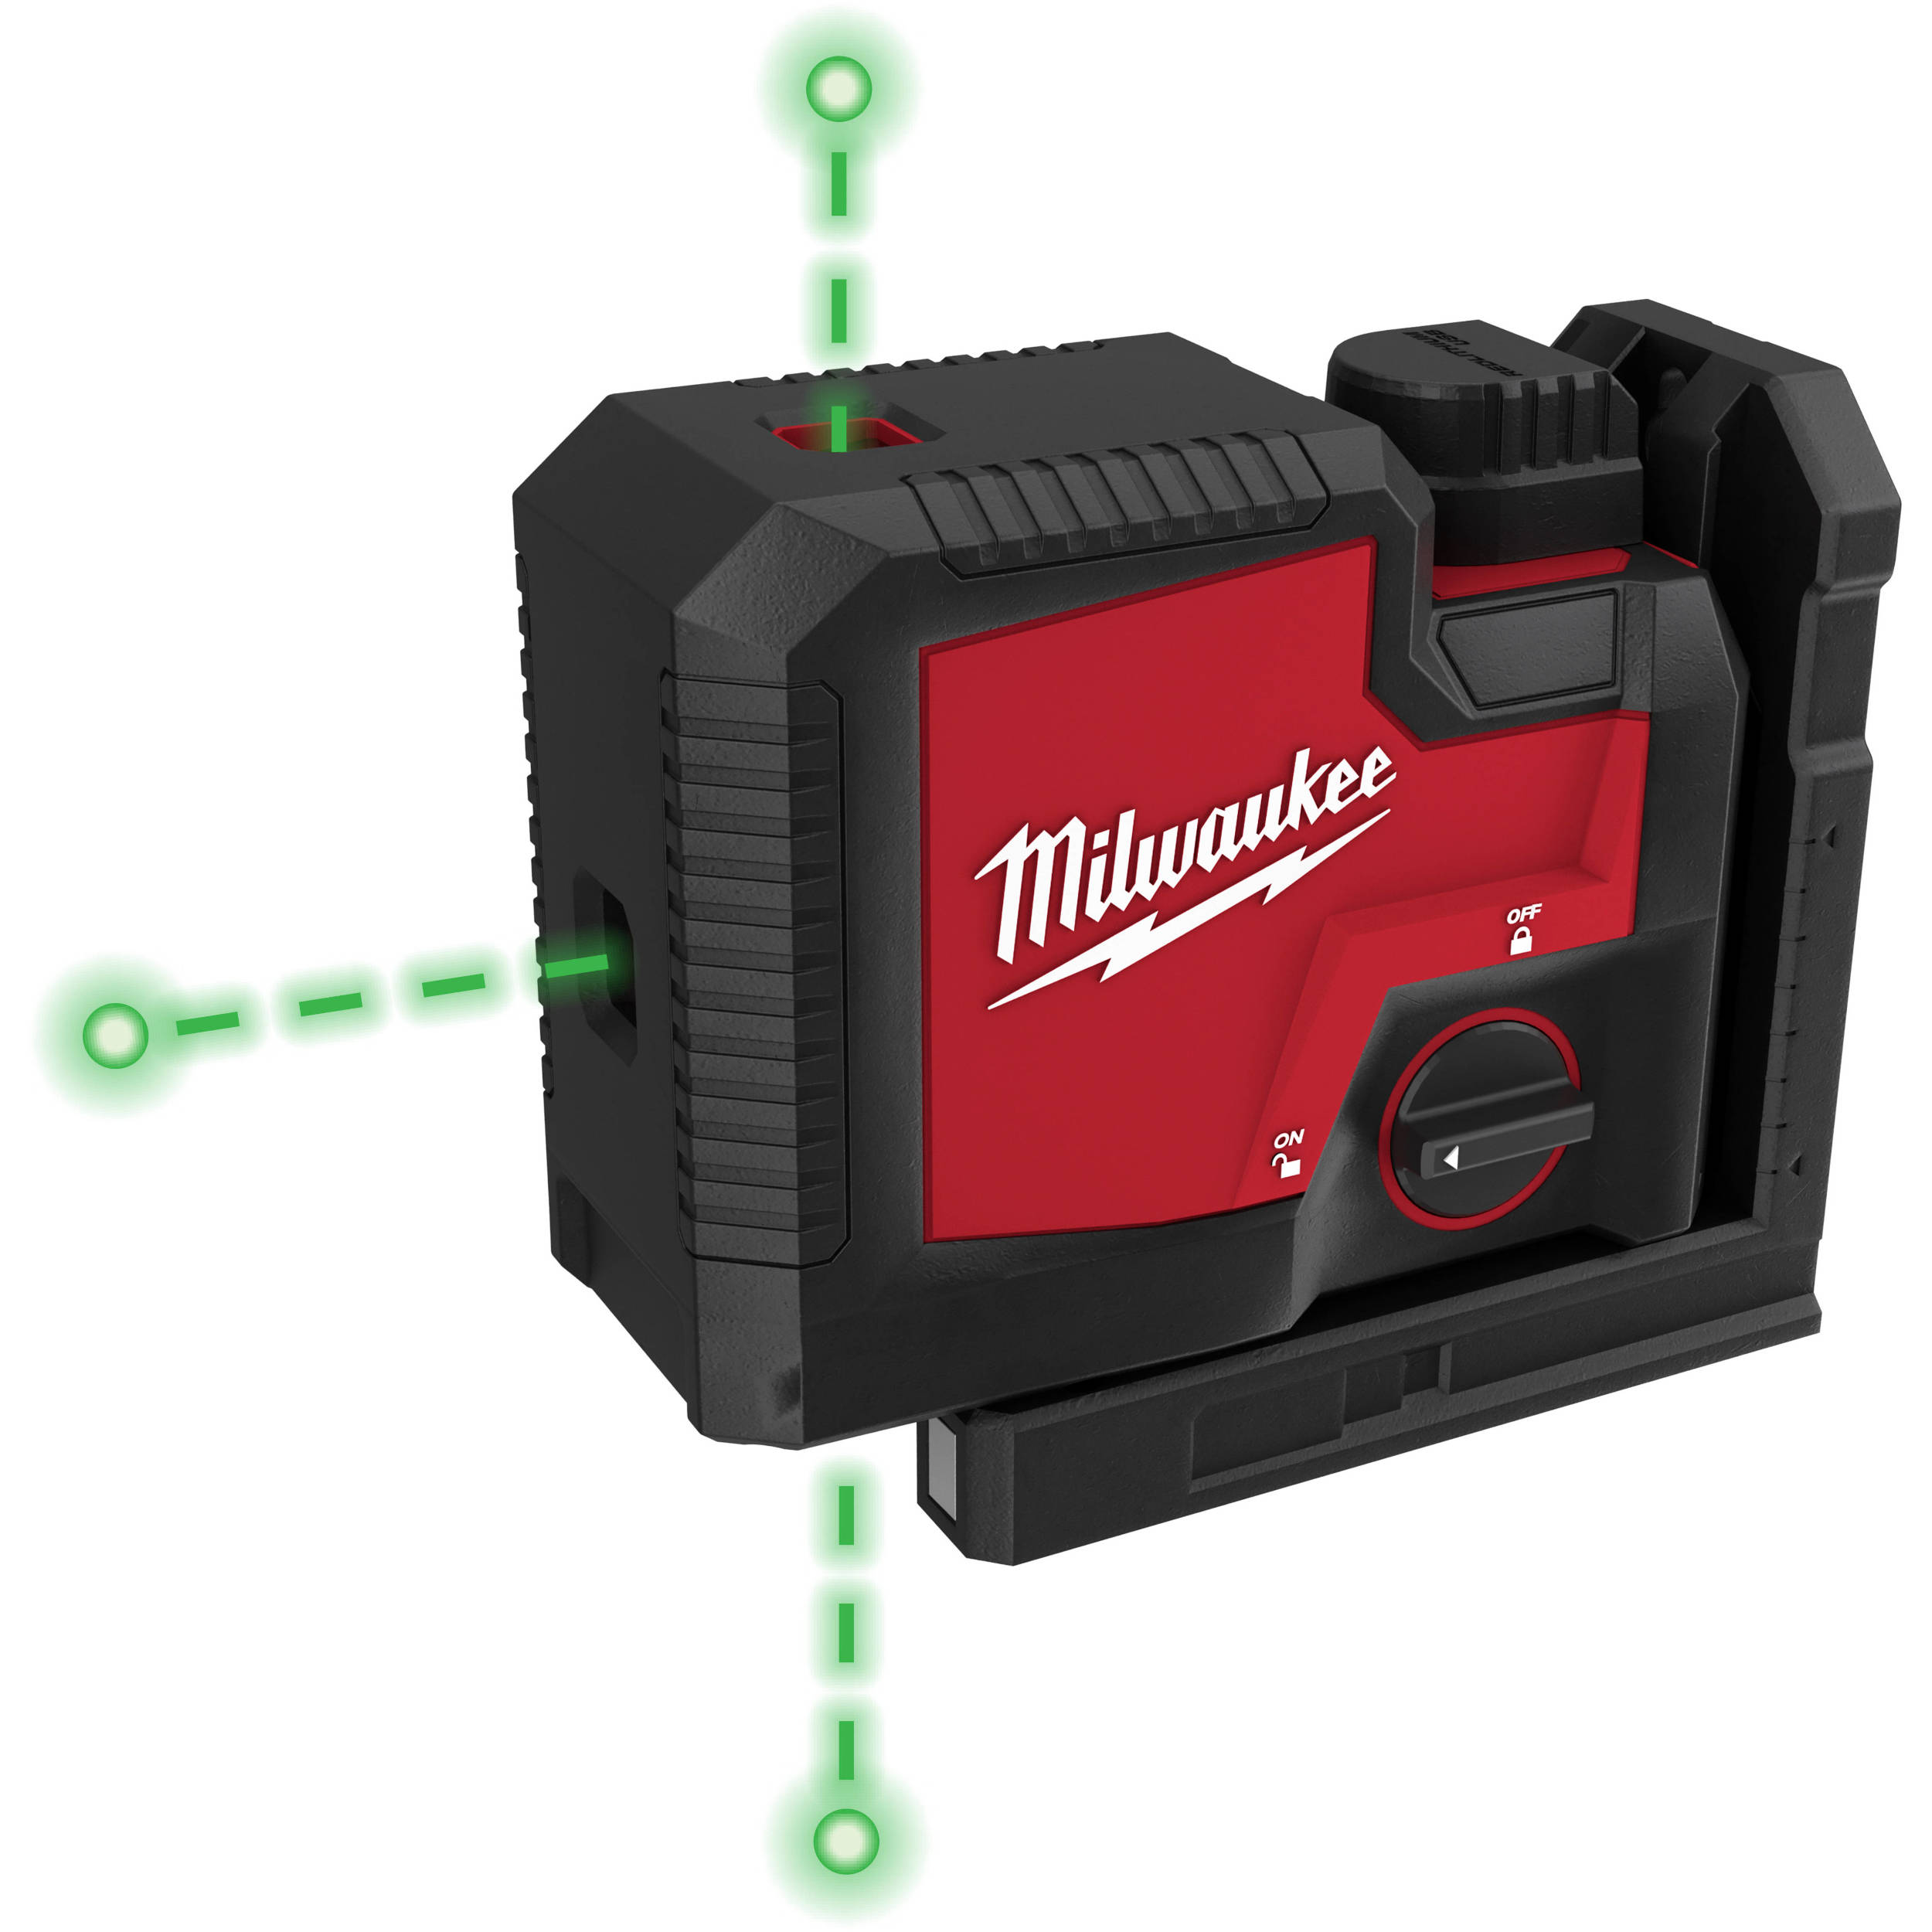 3510-21 Milwaukee USB Rechargeable Green 3-Point Laser 4